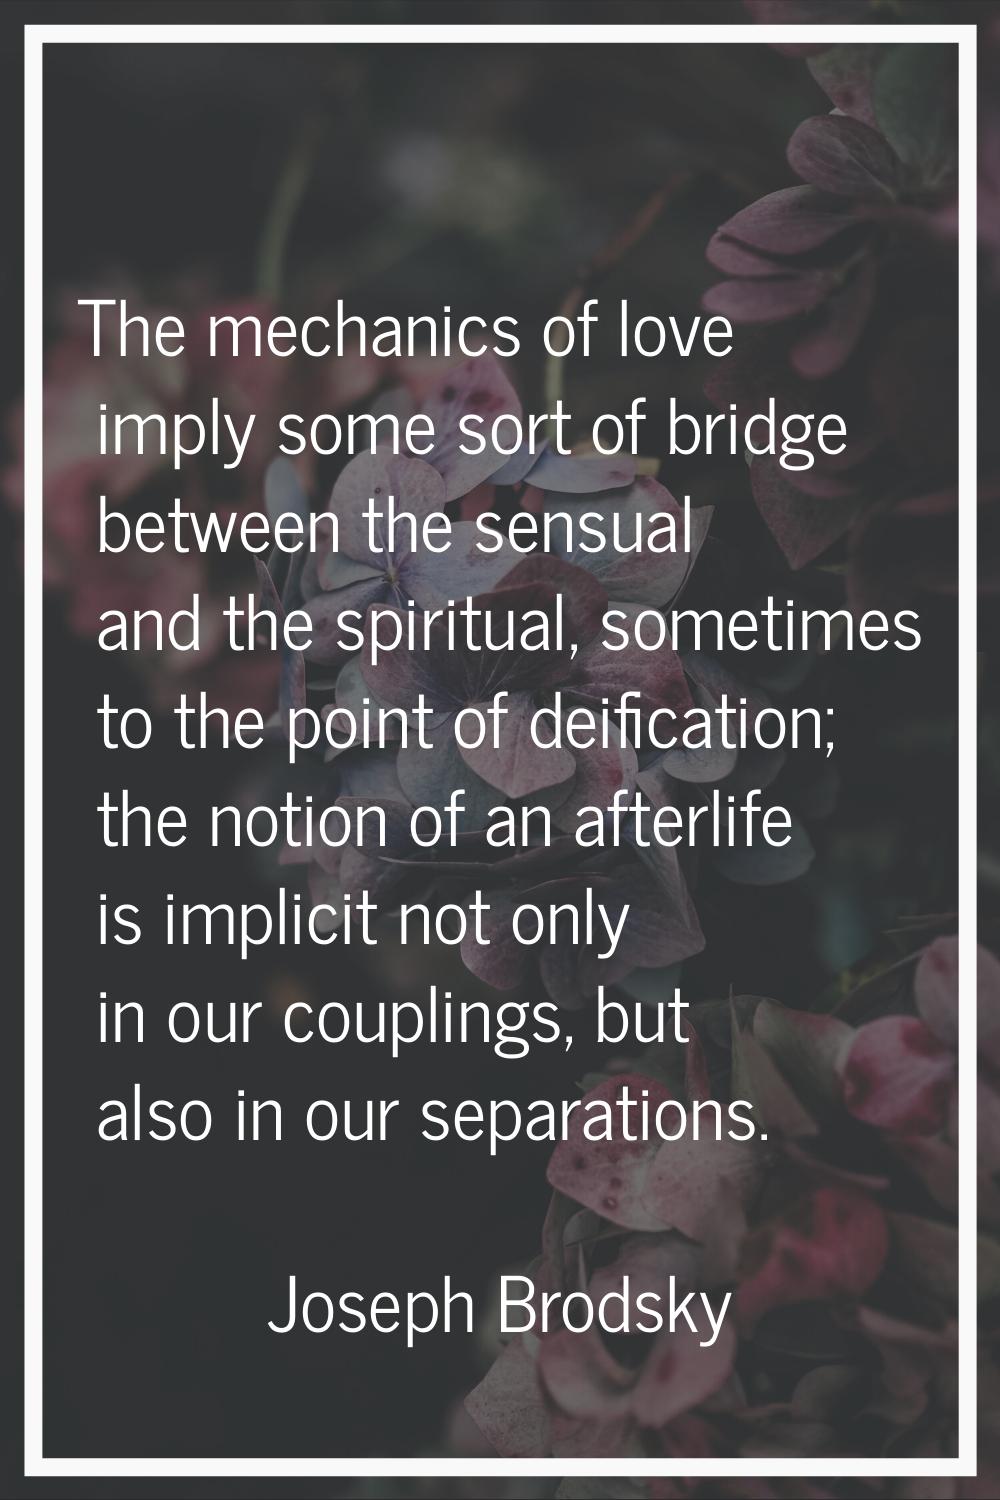 The mechanics of love imply some sort of bridge between the sensual and the spiritual, sometimes to